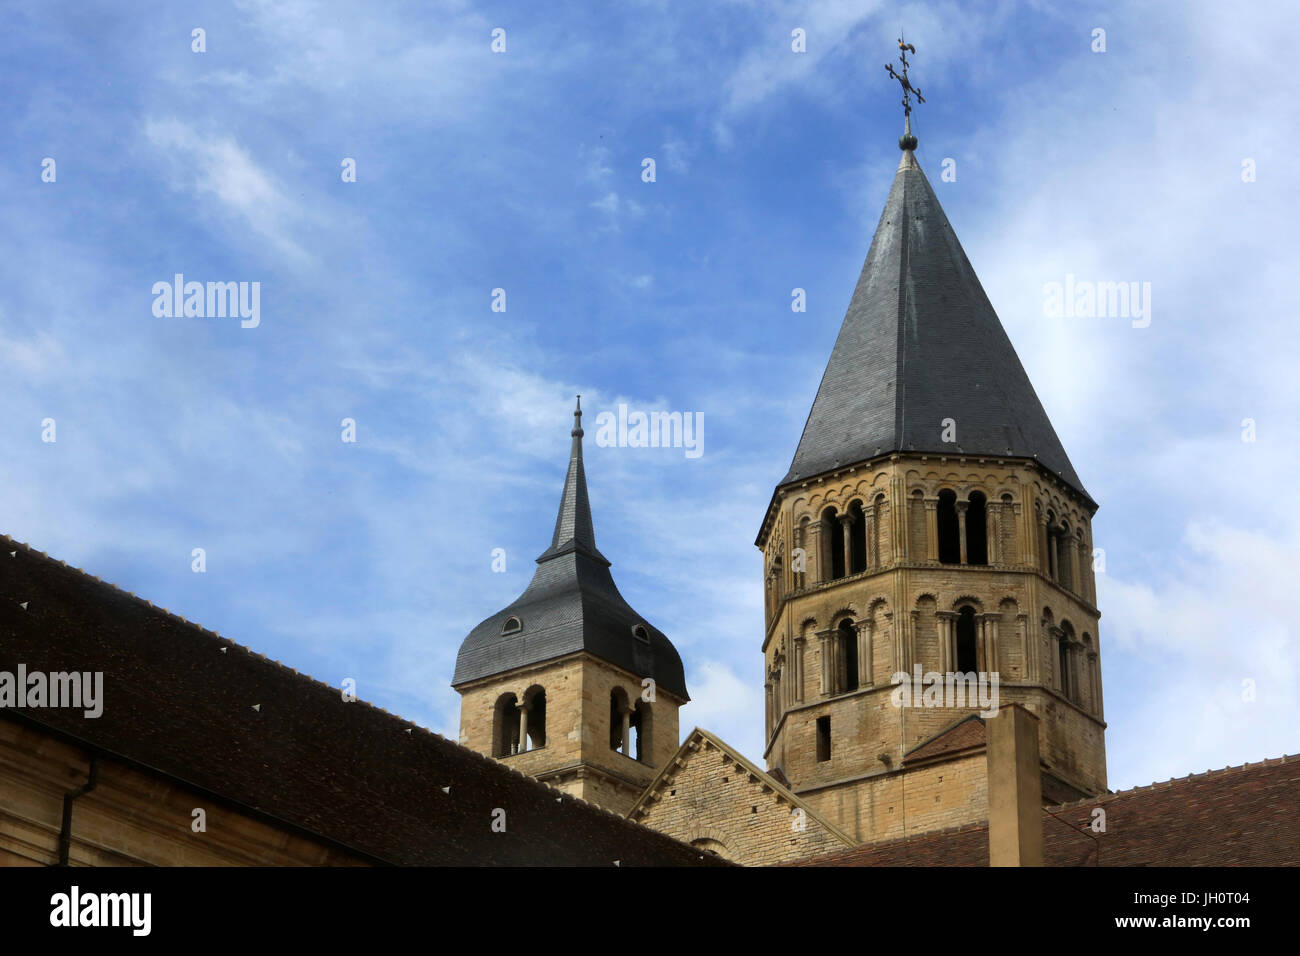 The bell tower of Holy Water and Tower Clock. Cluny Abbey. Cluny was founded in 910. France. Stock Photo